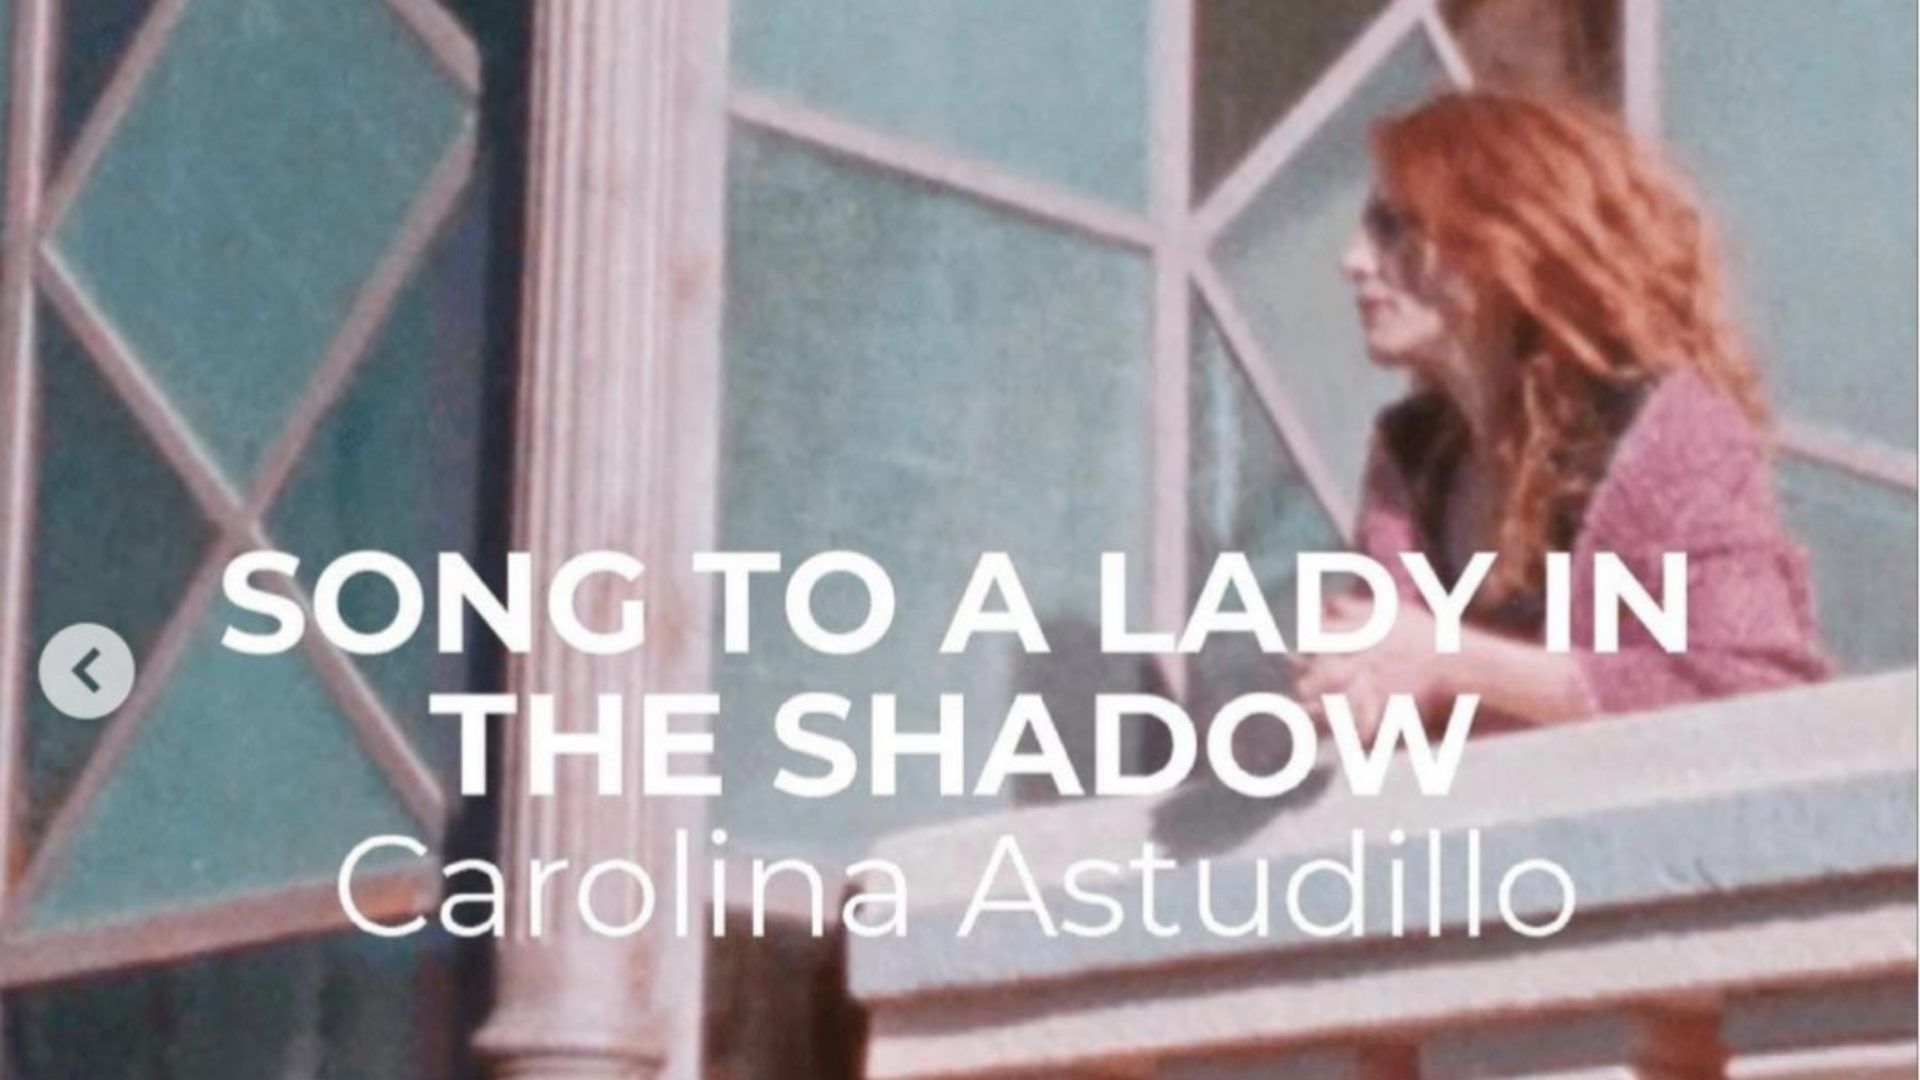 Song to a lady in the shadow